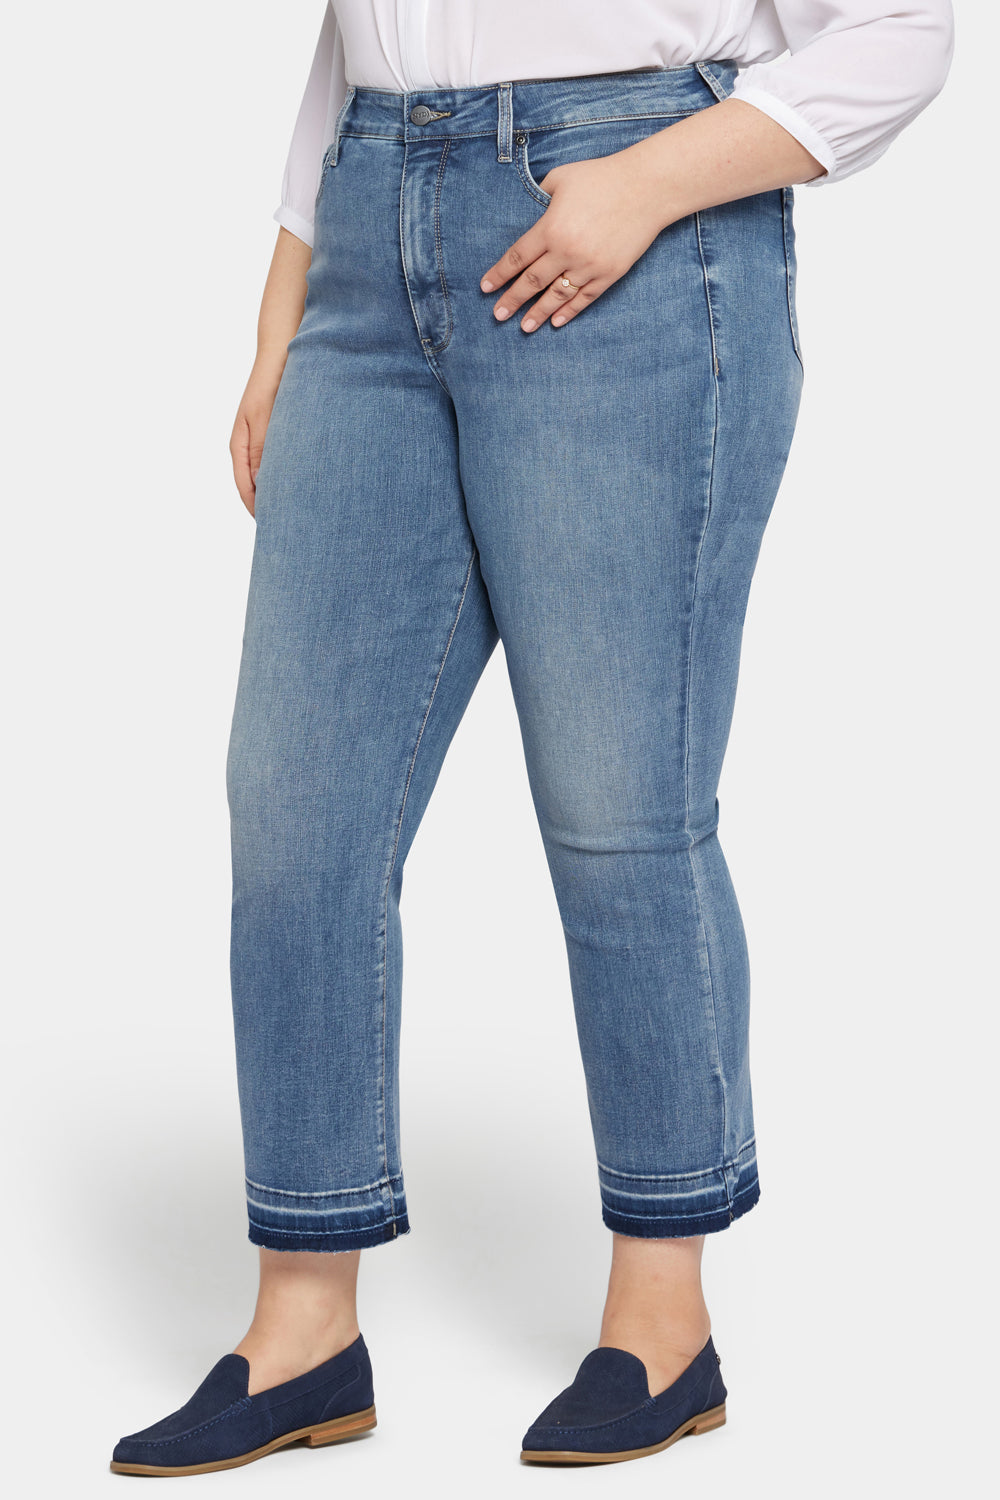 NYDJ Marilyn Straight Ankle Jeans In Petite Plus Size In Cool Embrace® Denim With High Rise And Released Hems - Fantasy